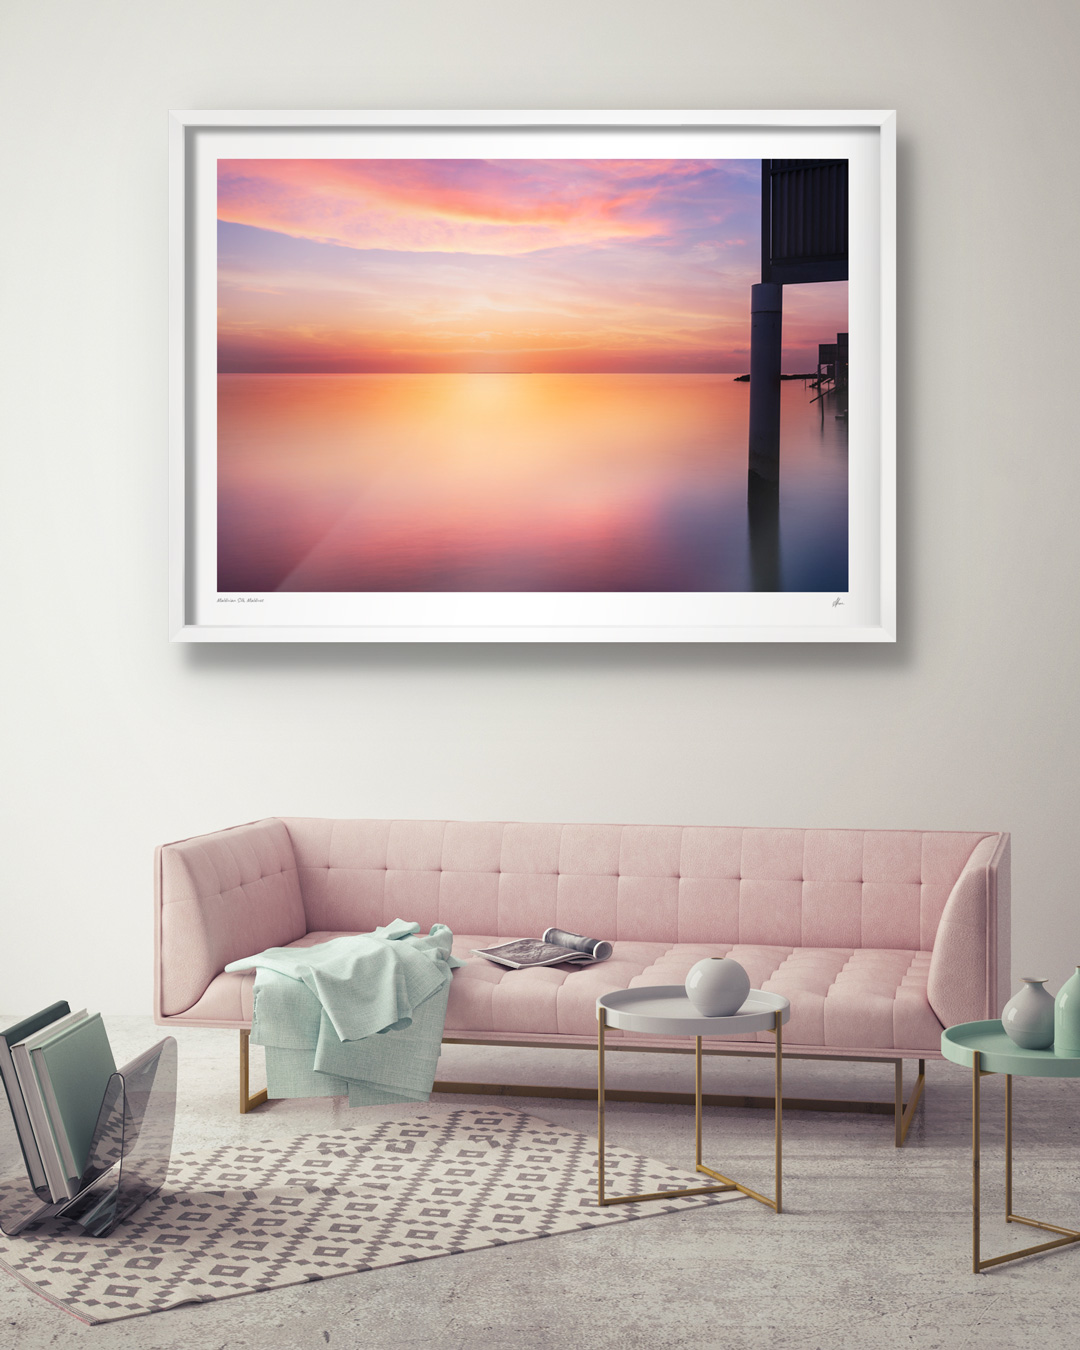 Interior design inspiration. Match your pink interior colour palette. Framed print of sunrise above over water bungalows in the Maldives.